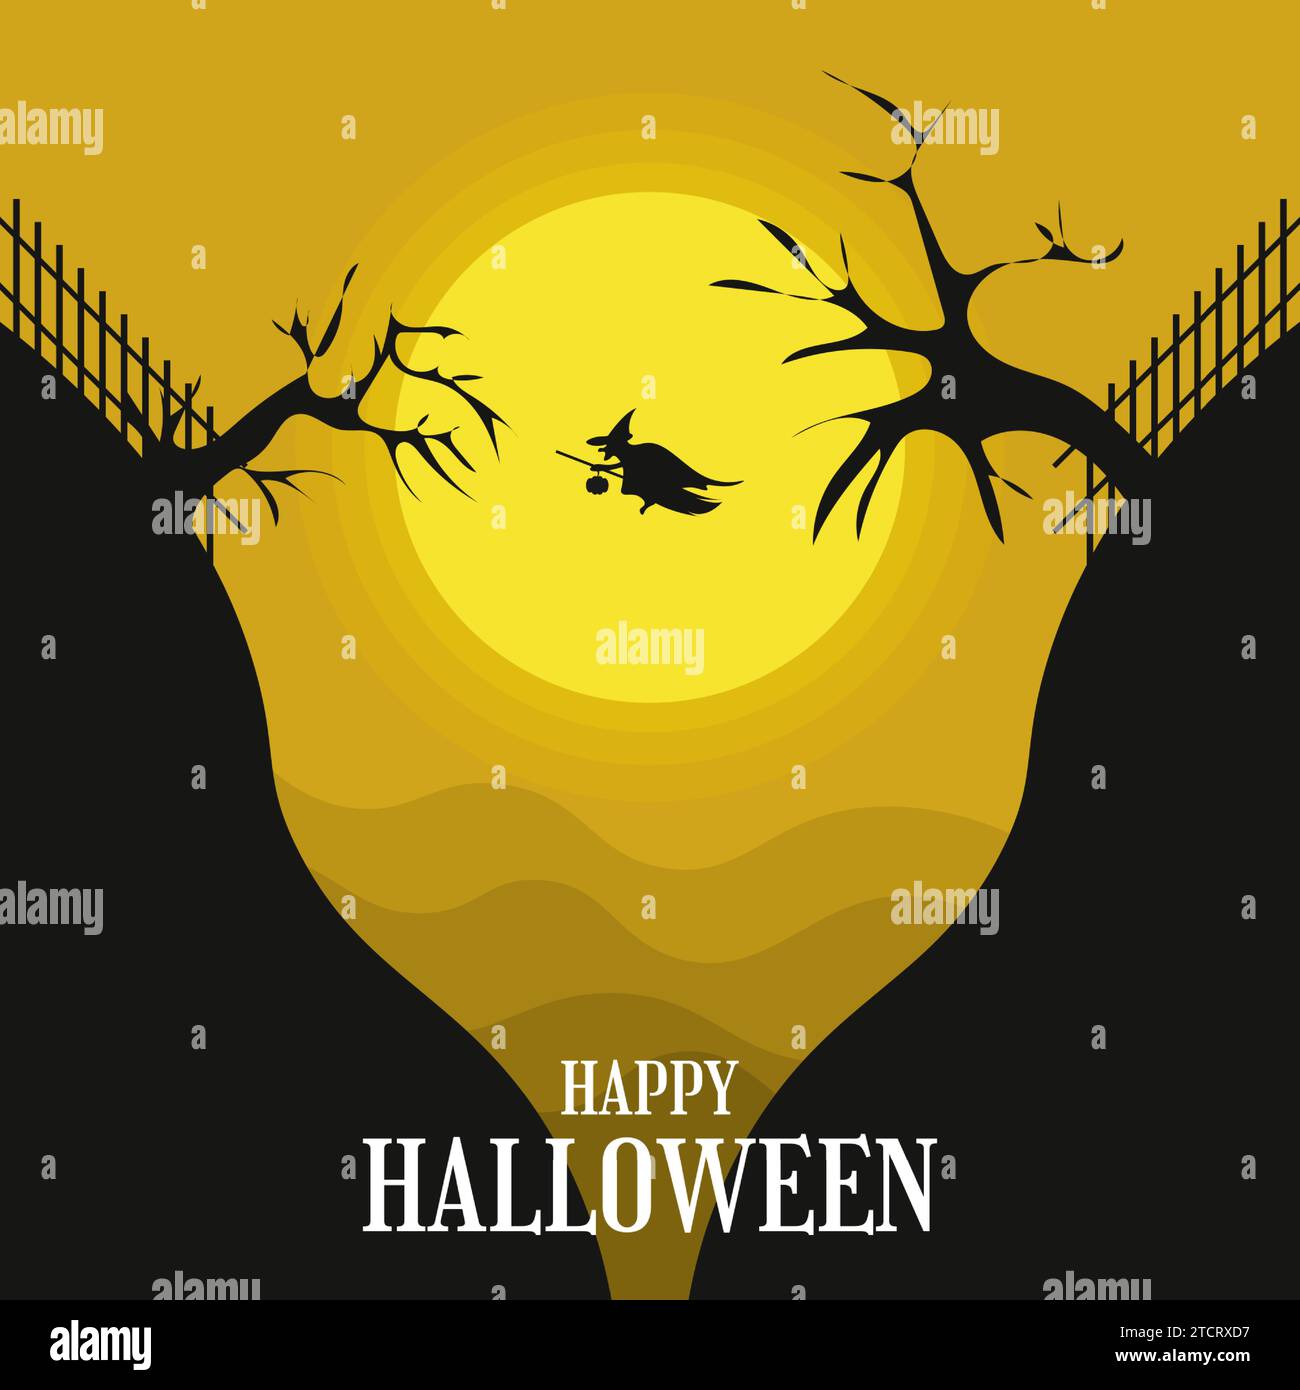 Happy Halloween greeting with a witch flying between the cliff and the moon Stock Vector